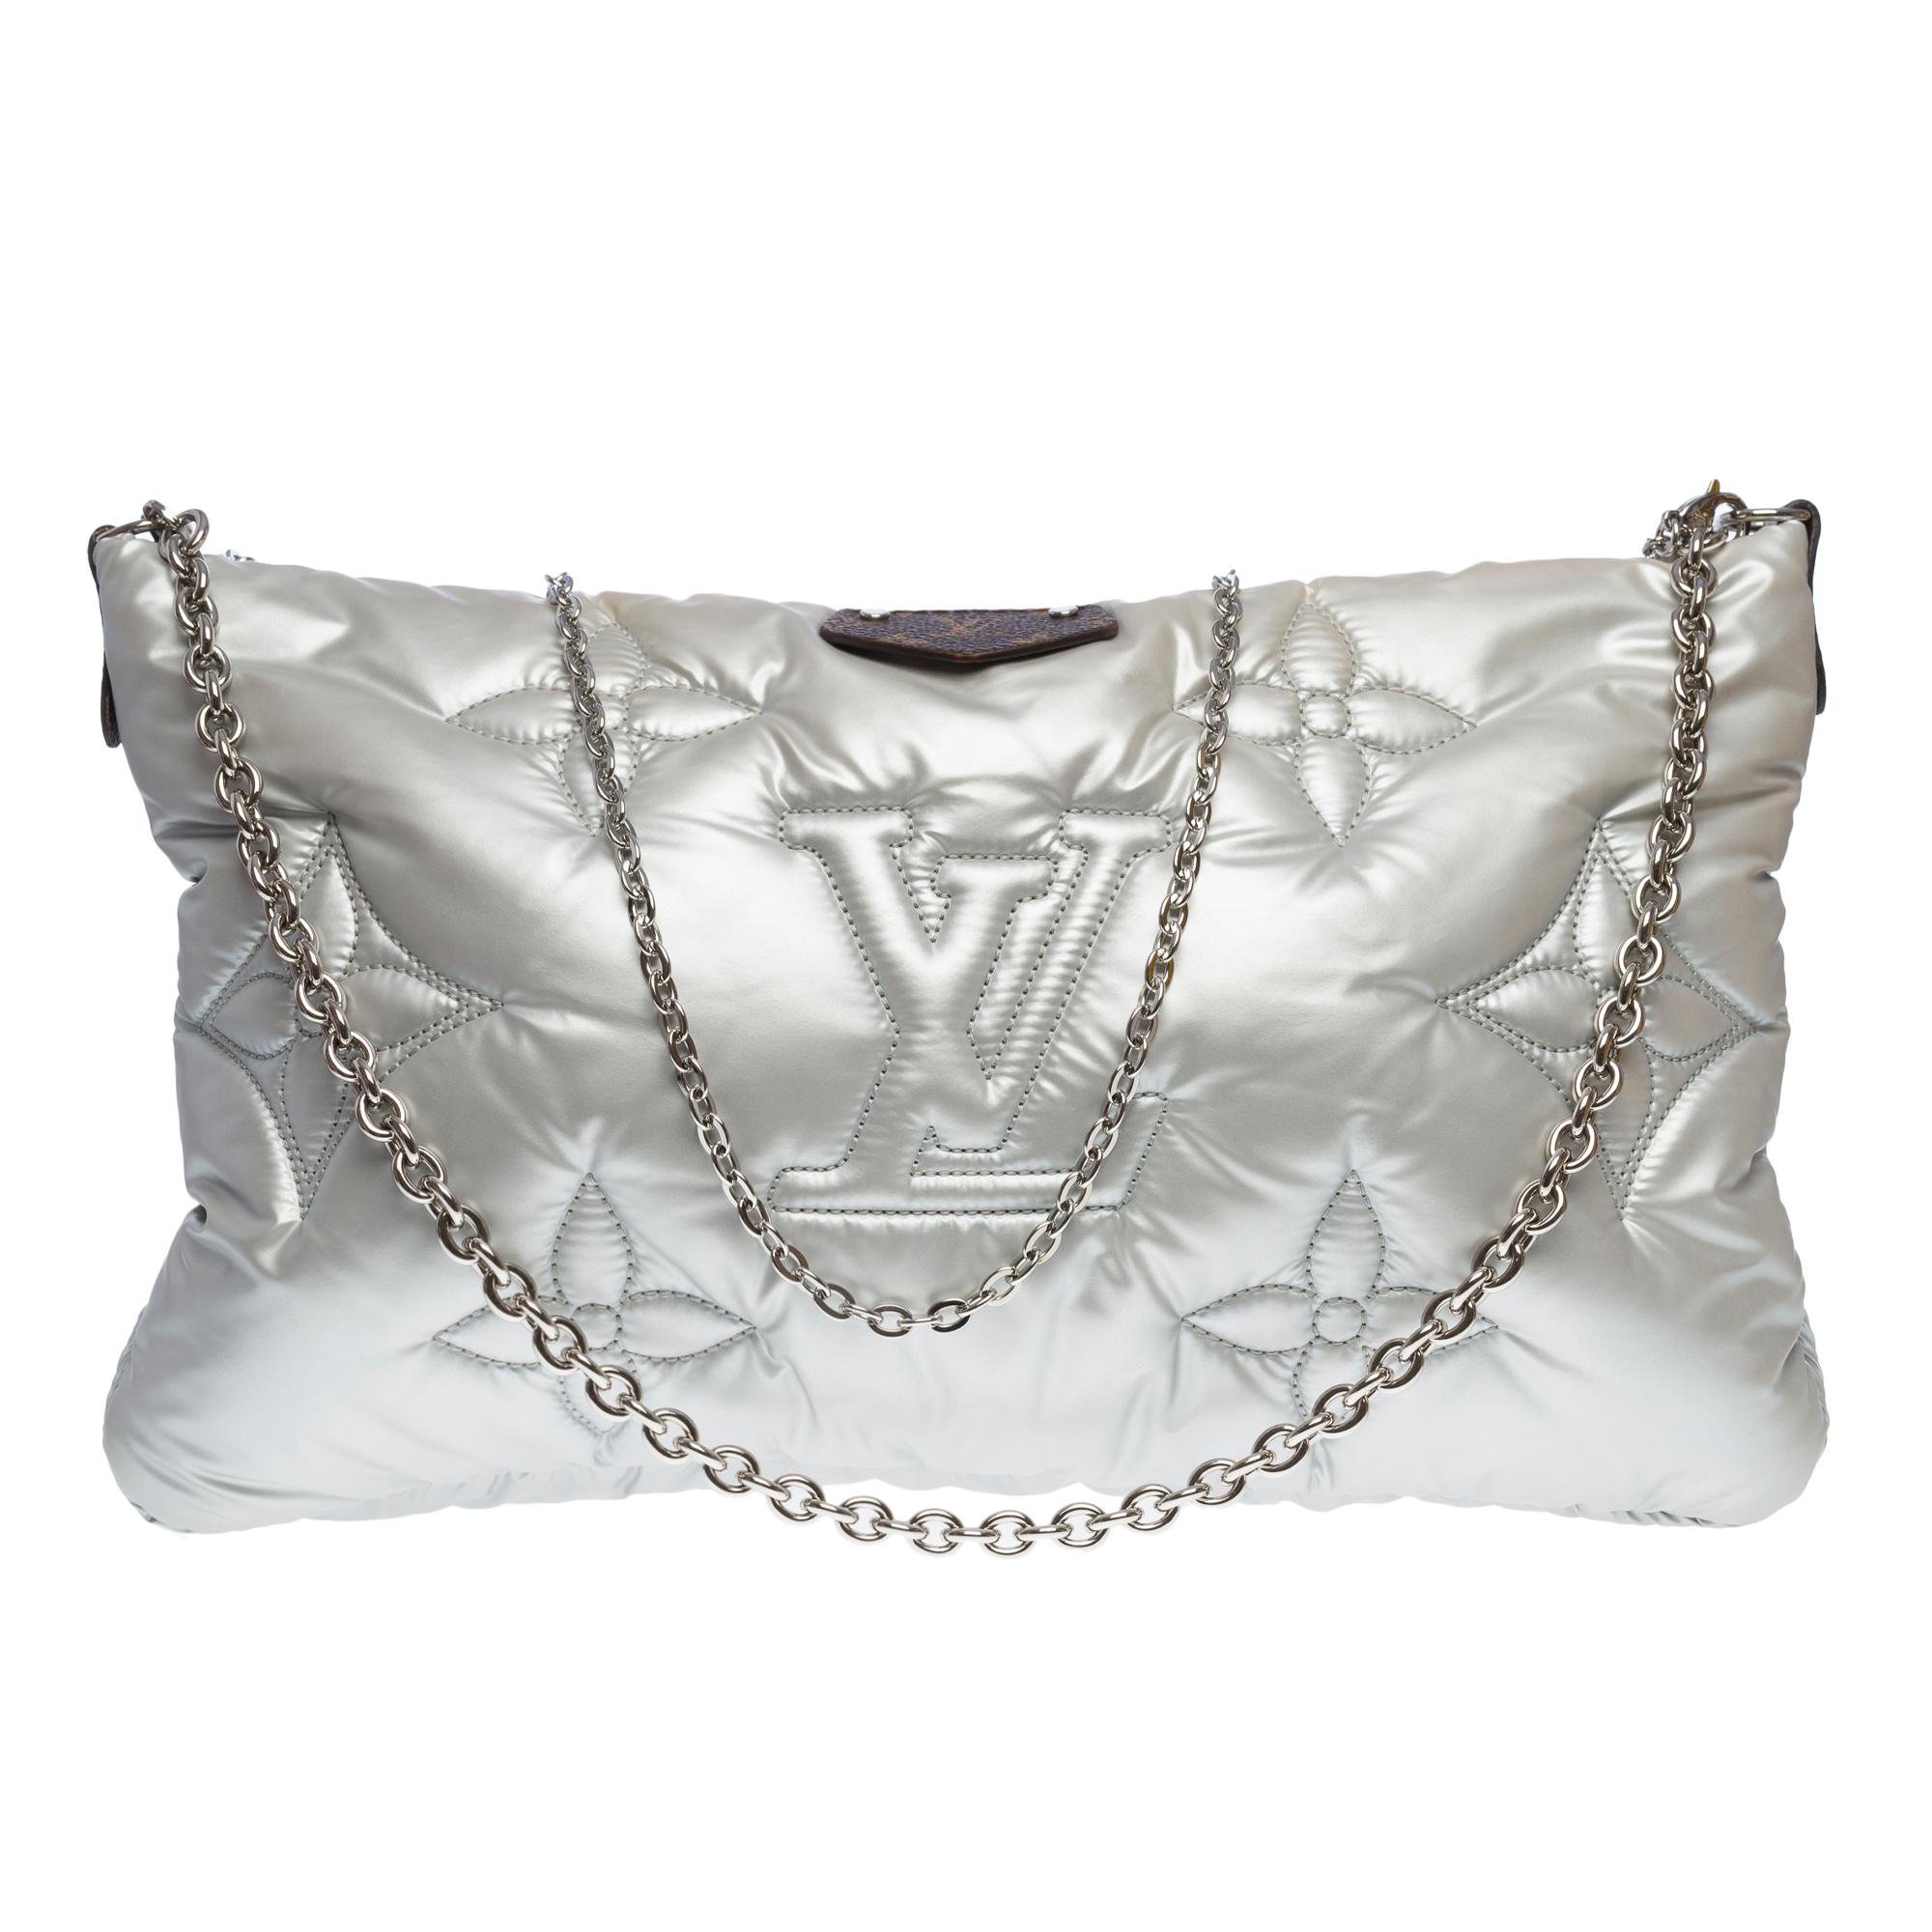 Crafted from recycled nylon in Silver, the Maxi Pochette Accessoires belongs to the season’s LV Pillow capsule. This playful piece provides so many styling opportunities: it can be worn cross-body on the long removable strap, carried as a clutch or